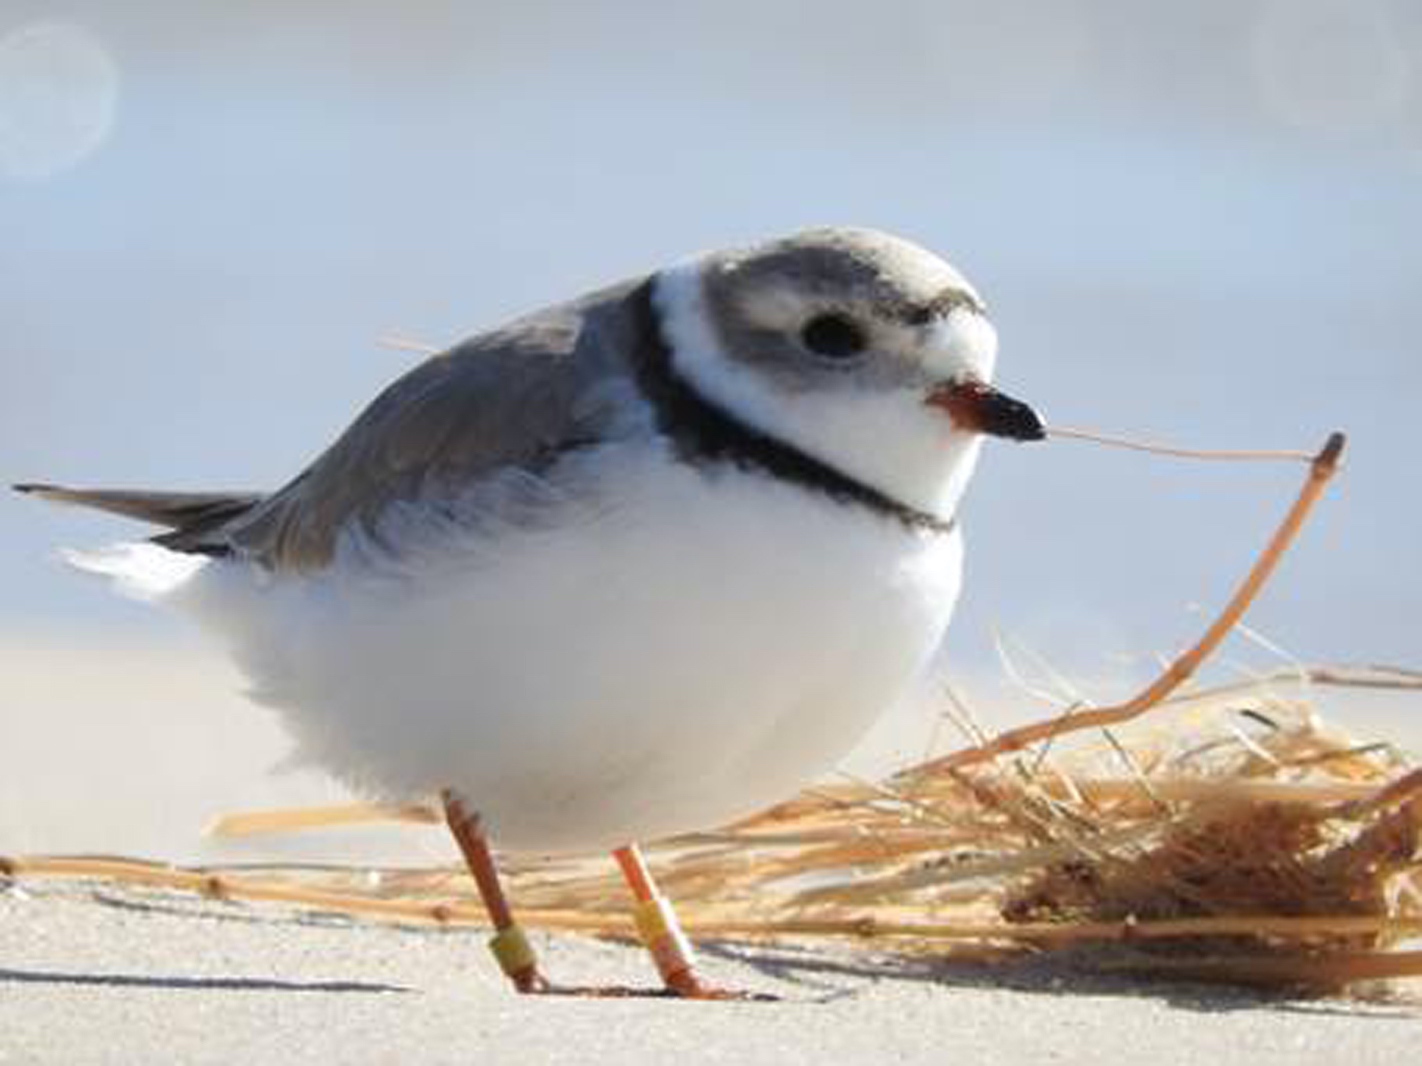 Piping Plover with leg bands